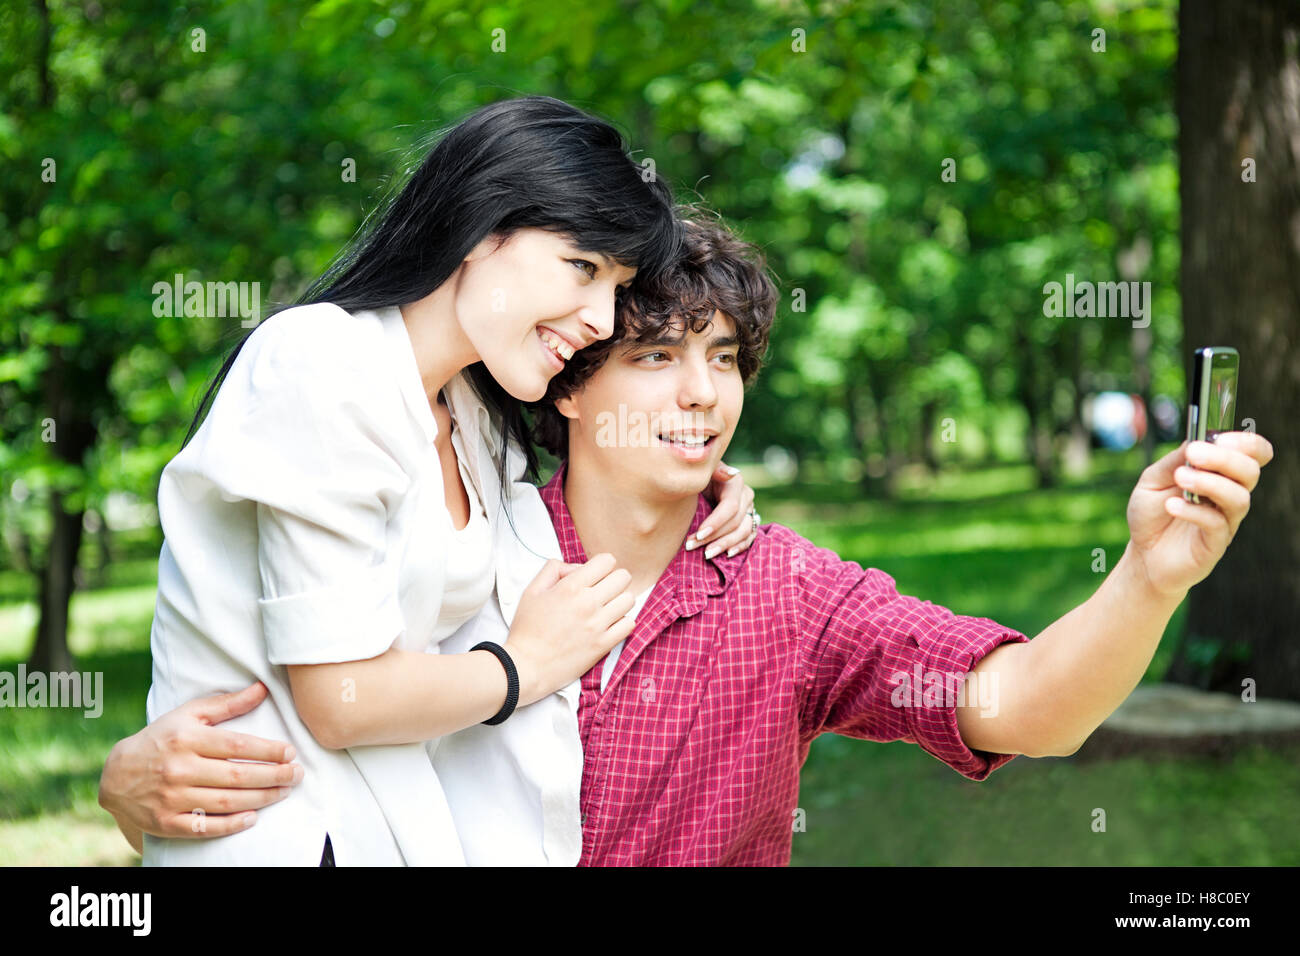 Young Caucasian couple making an outdoor selfie. Stock Photo